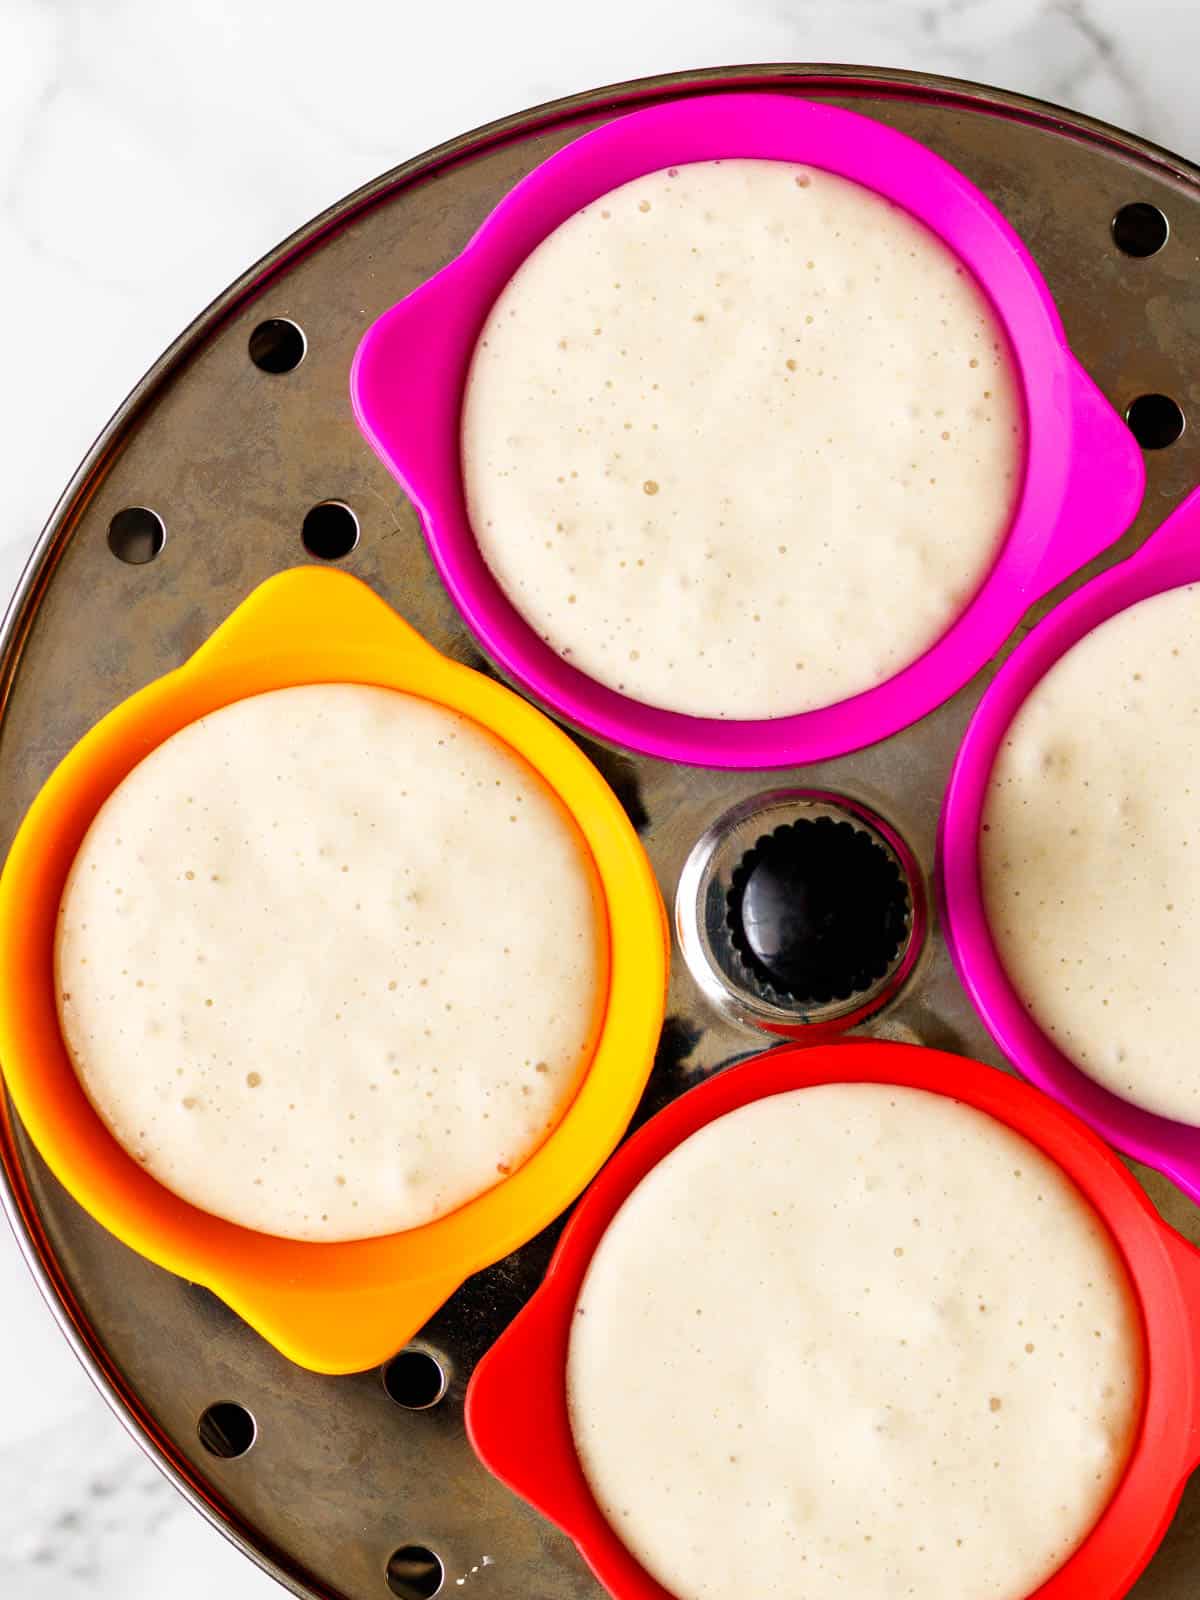 Idli batter in liners on steaming tray.